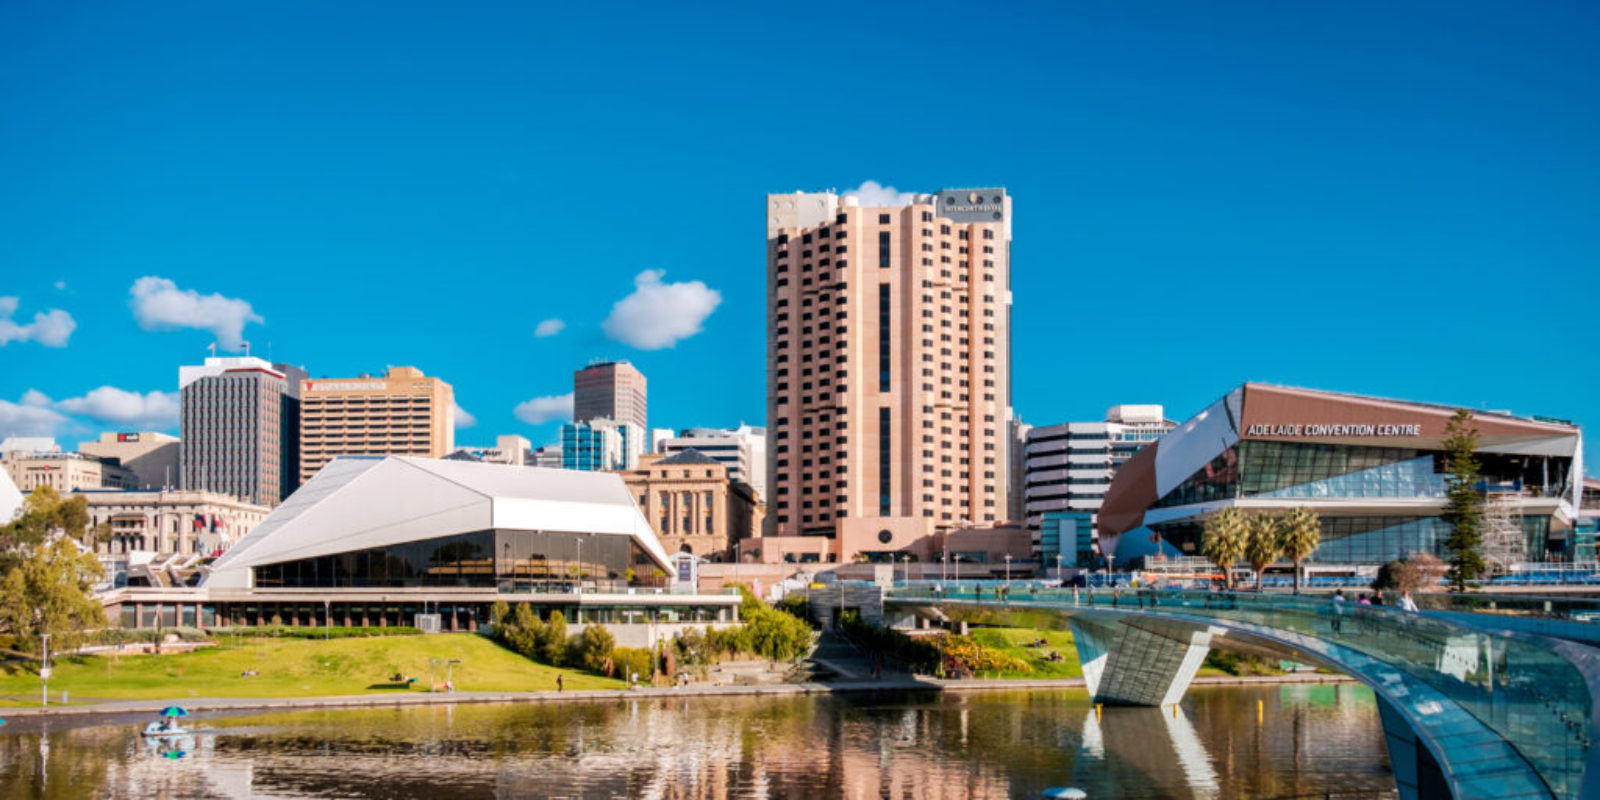 Adelaide, Australia is an oft-overlooked city, but it has plenty to tempt travellers, from award-winning wines to isolated wildlife lodges on Kangaroo Is...